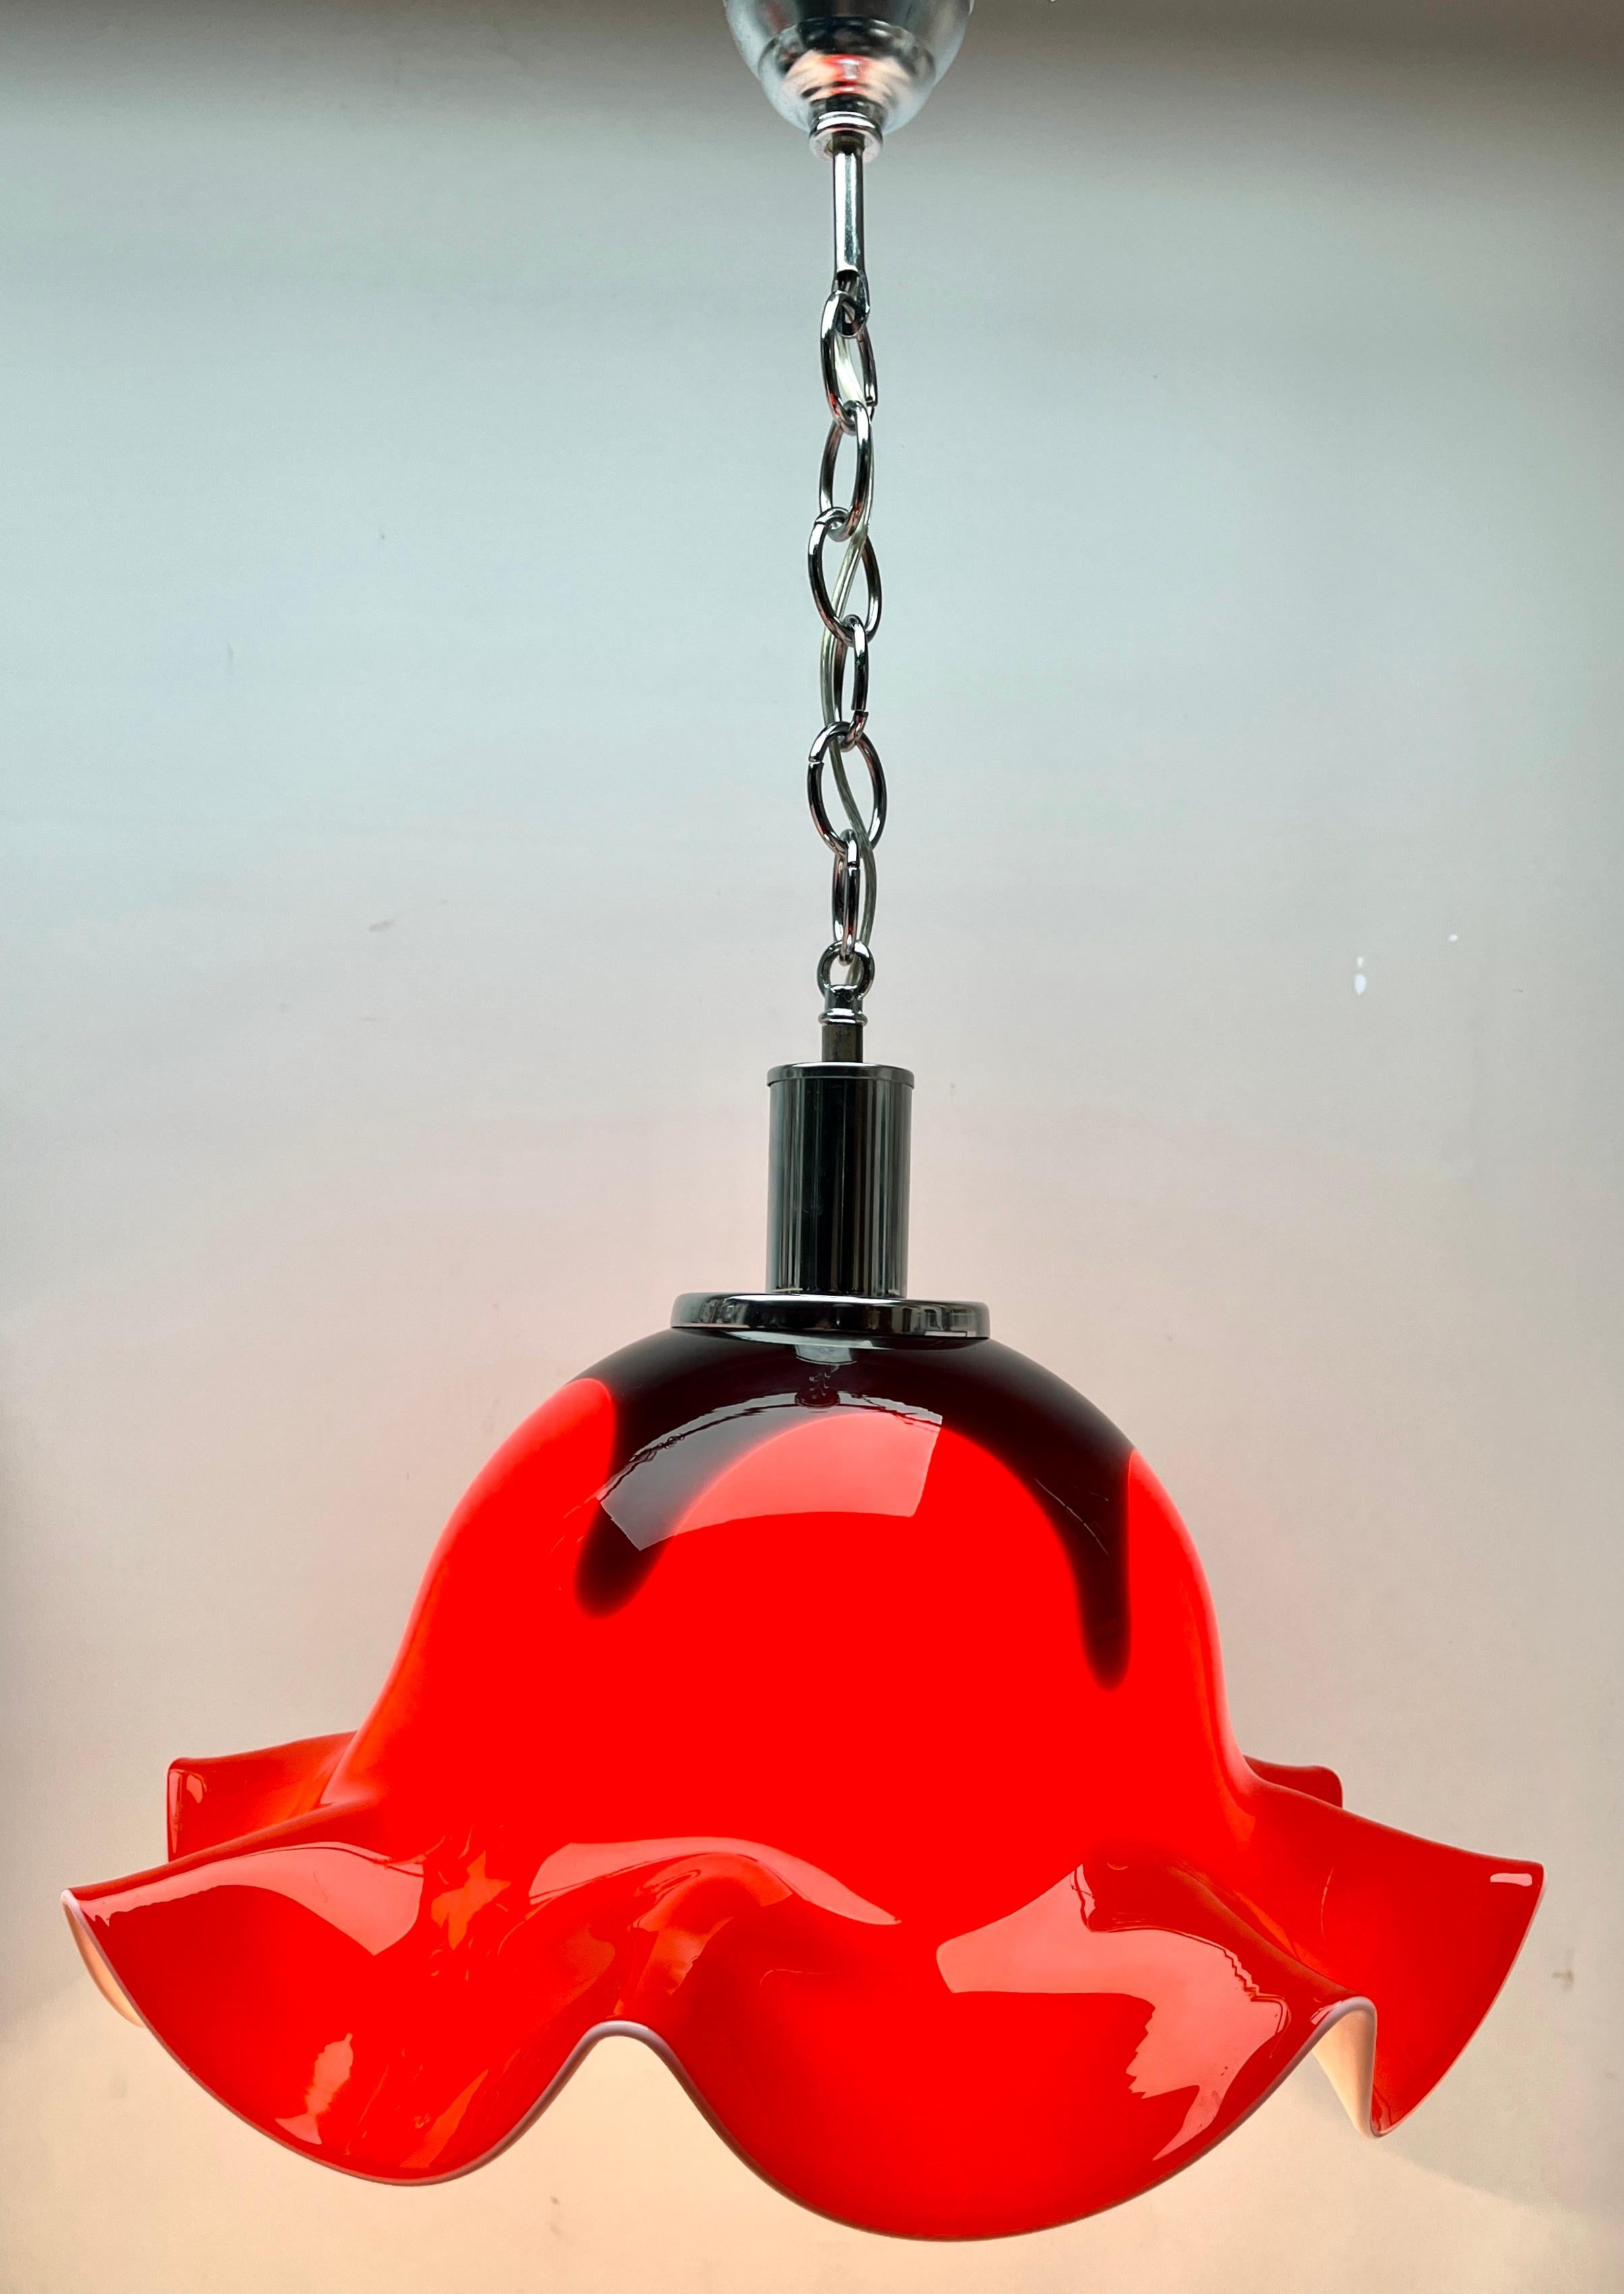 Vintage pendant light Murano. This central pendant light is crafted from heavy hand-blown glass with dramatic swirling clouds of red and black creating a warm feel. 

Photography fails to capture the simple elegant illumination provided by this